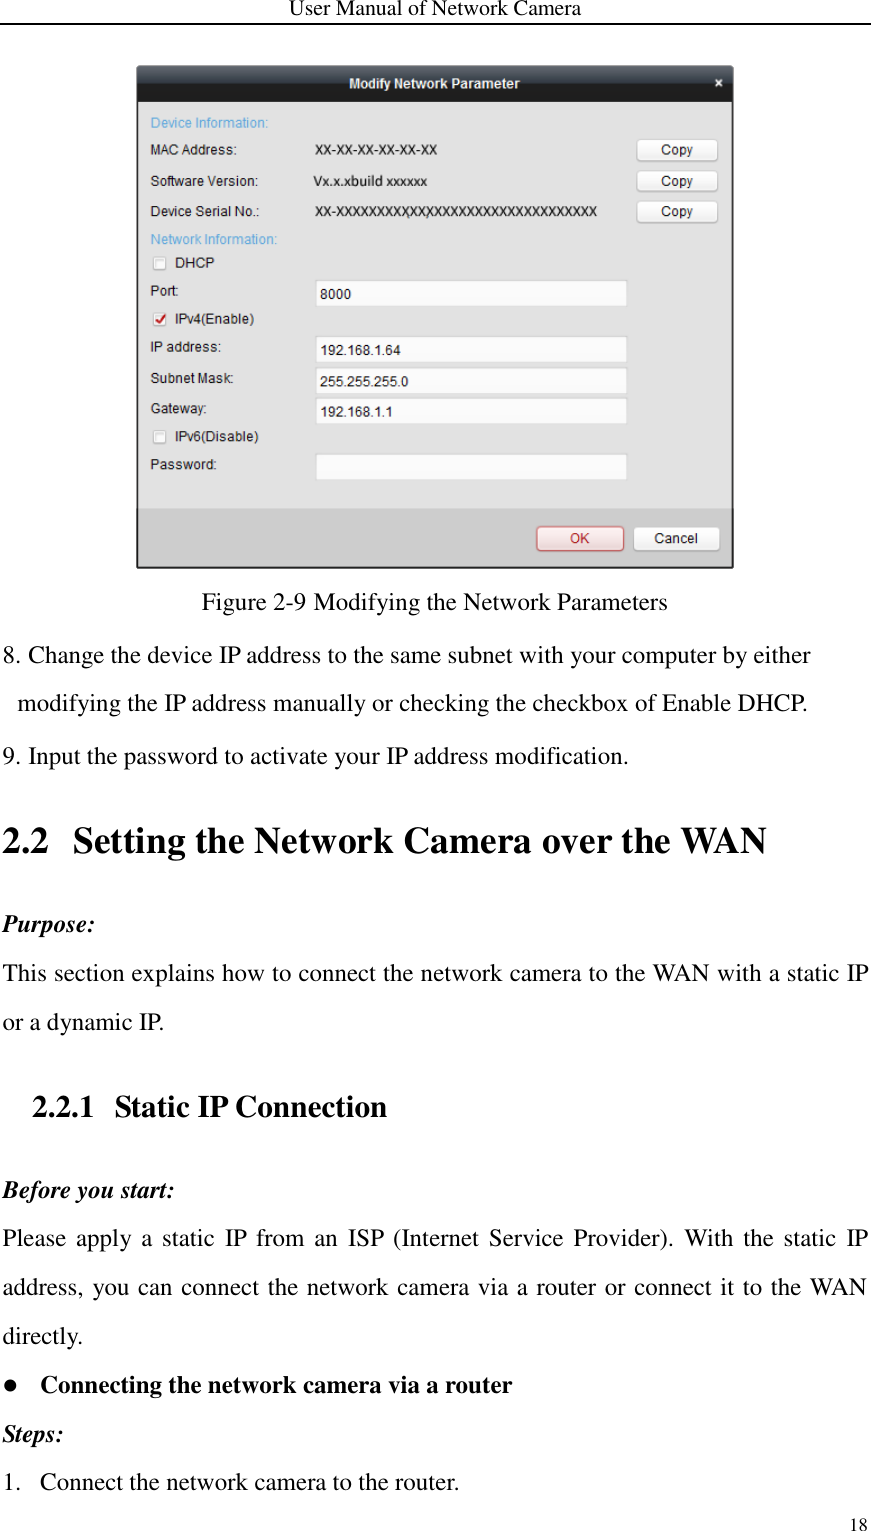 User Manual of Network Camera 18   Figure 2-9 Modifying the Network Parameters 8. Change the device IP address to the same subnet with your computer by either modifying the IP address manually or checking the checkbox of Enable DHCP. 9. Input the password to activate your IP address modification. 2.2 Setting the Network Camera over the WAN Purpose: This section explains how to connect the network camera to the WAN with a static IP or a dynamic IP.   2.2.1 Static IP Connection Before you start: Please apply a  static  IP  from an ISP (Internet Service  Provider).  With the static  IP address, you can connect the network camera via a router or connect it to the WAN directly.  Connecting the network camera via a router Steps: 1. Connect the network camera to the router. 